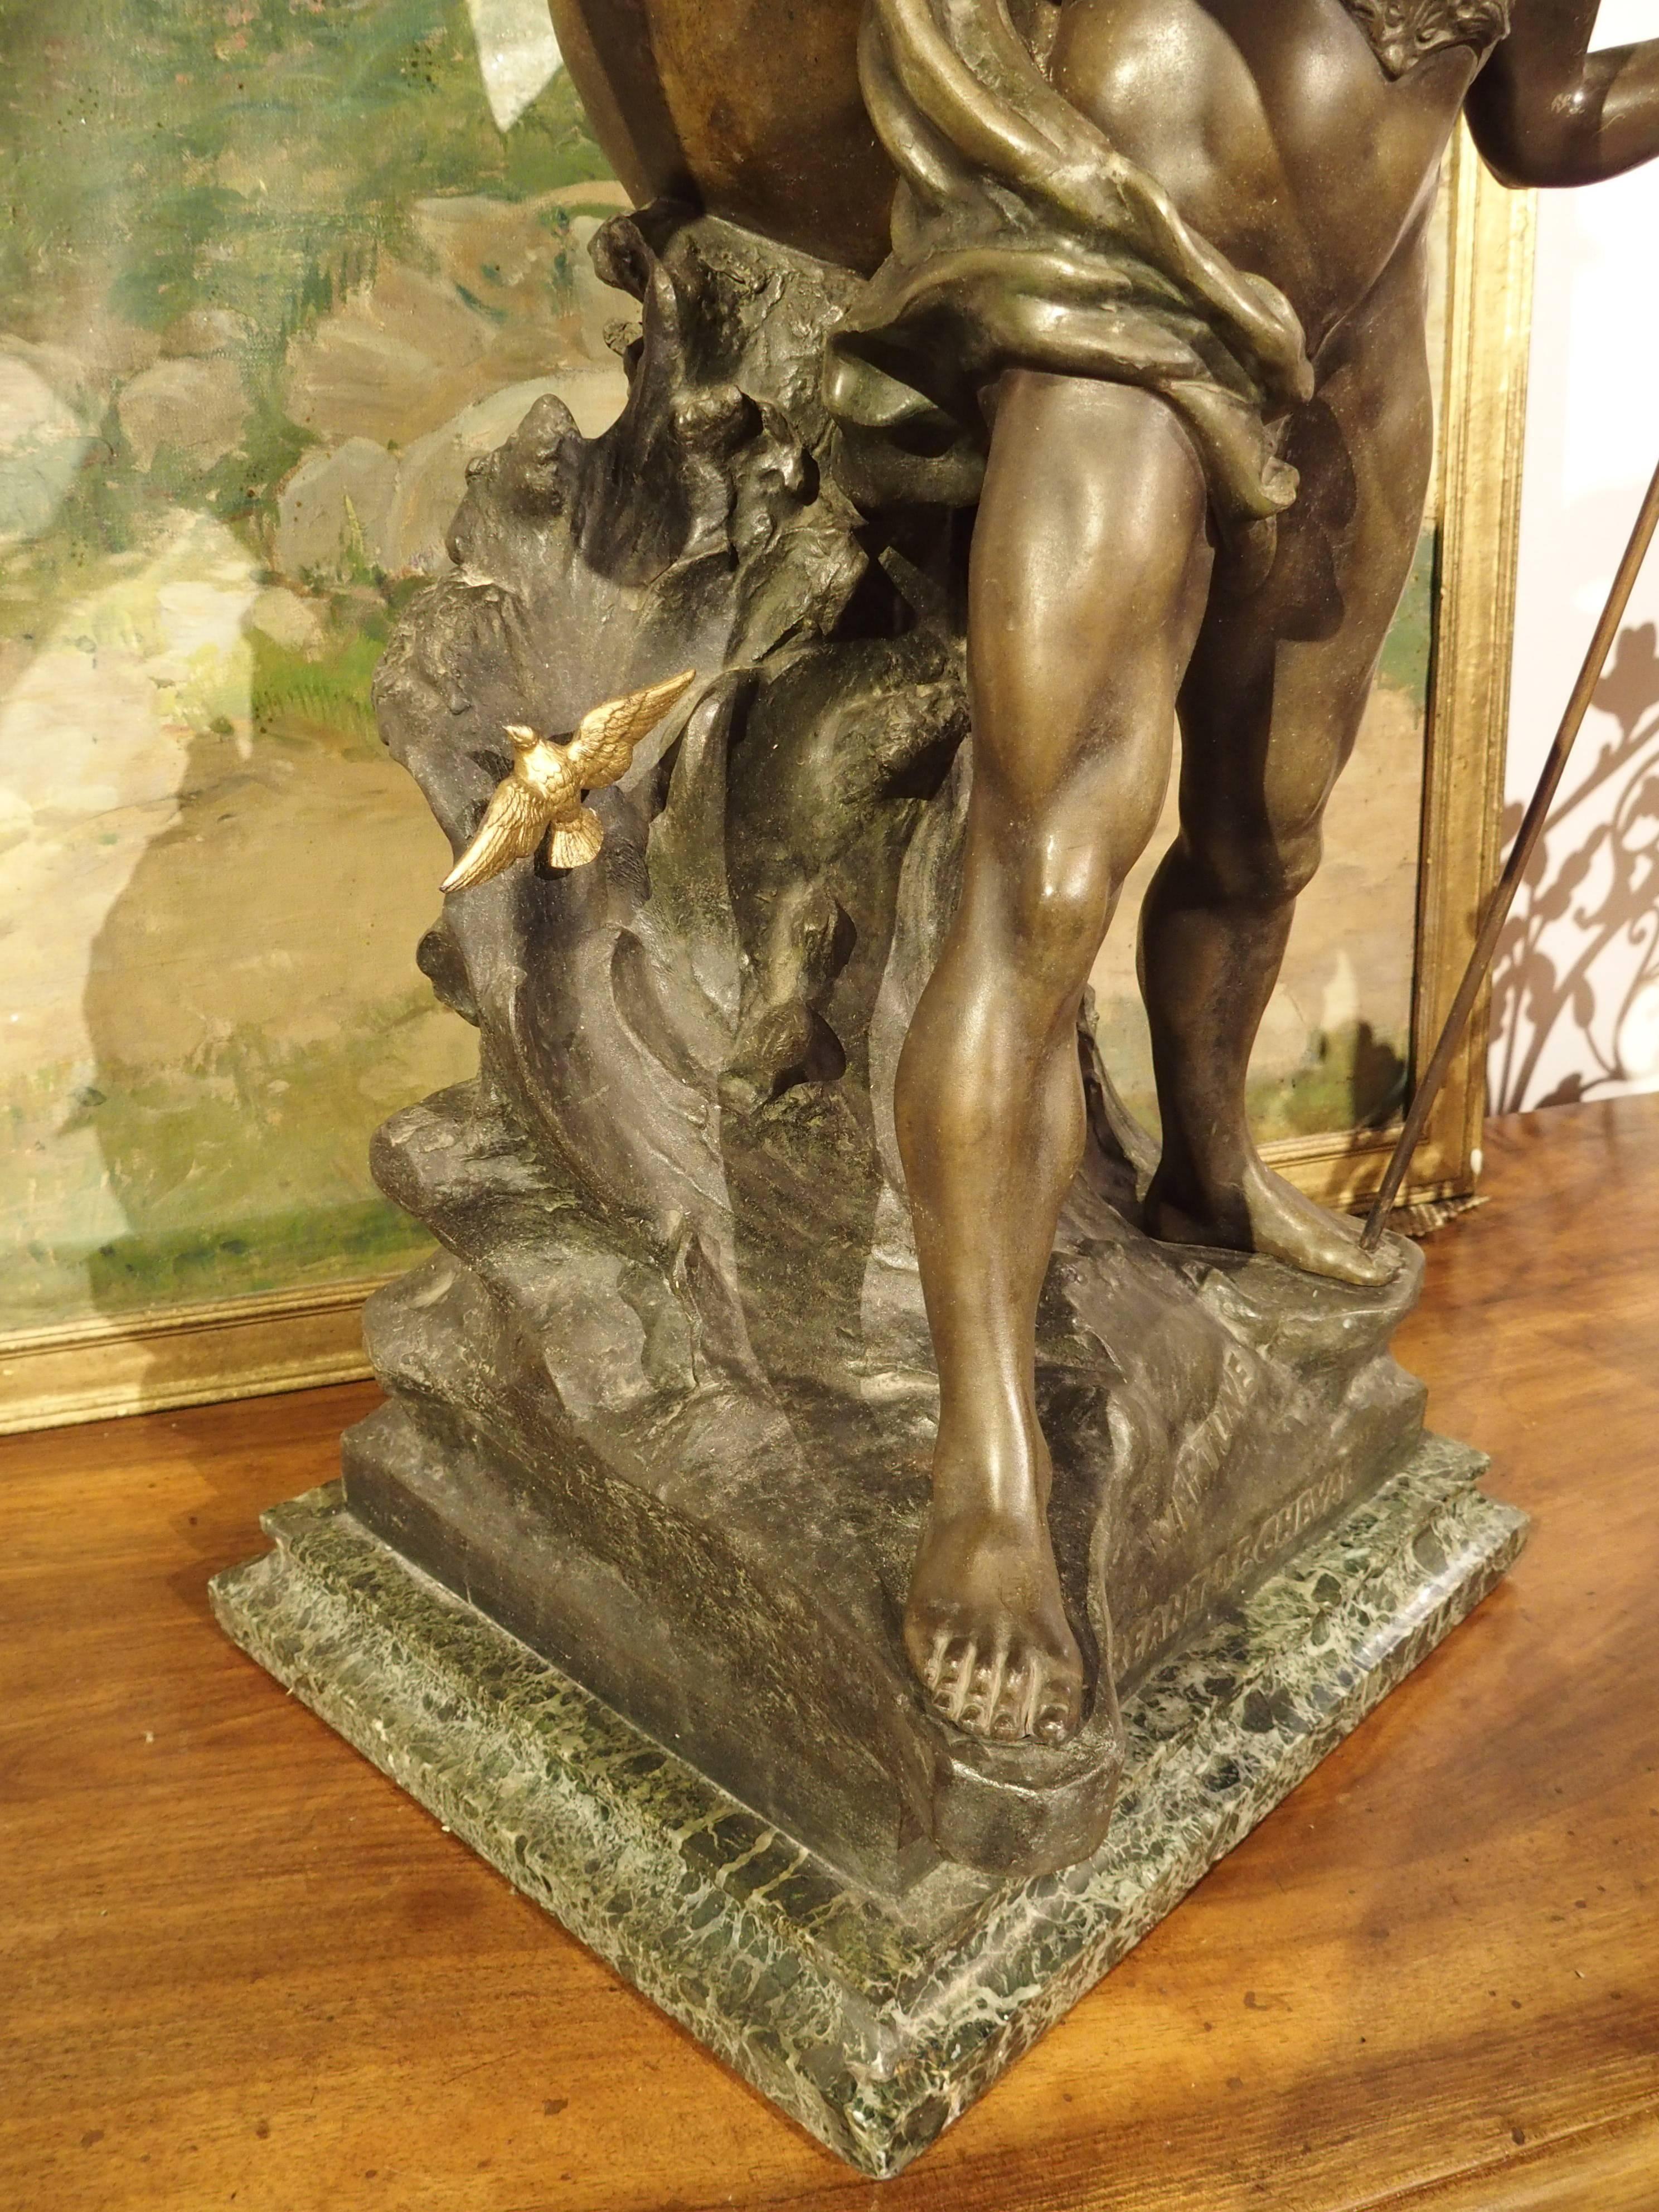 This antique French statue of Neptune with horse is after the famous French sculptor Emile Louis Picault (1833-1915). It is titled 